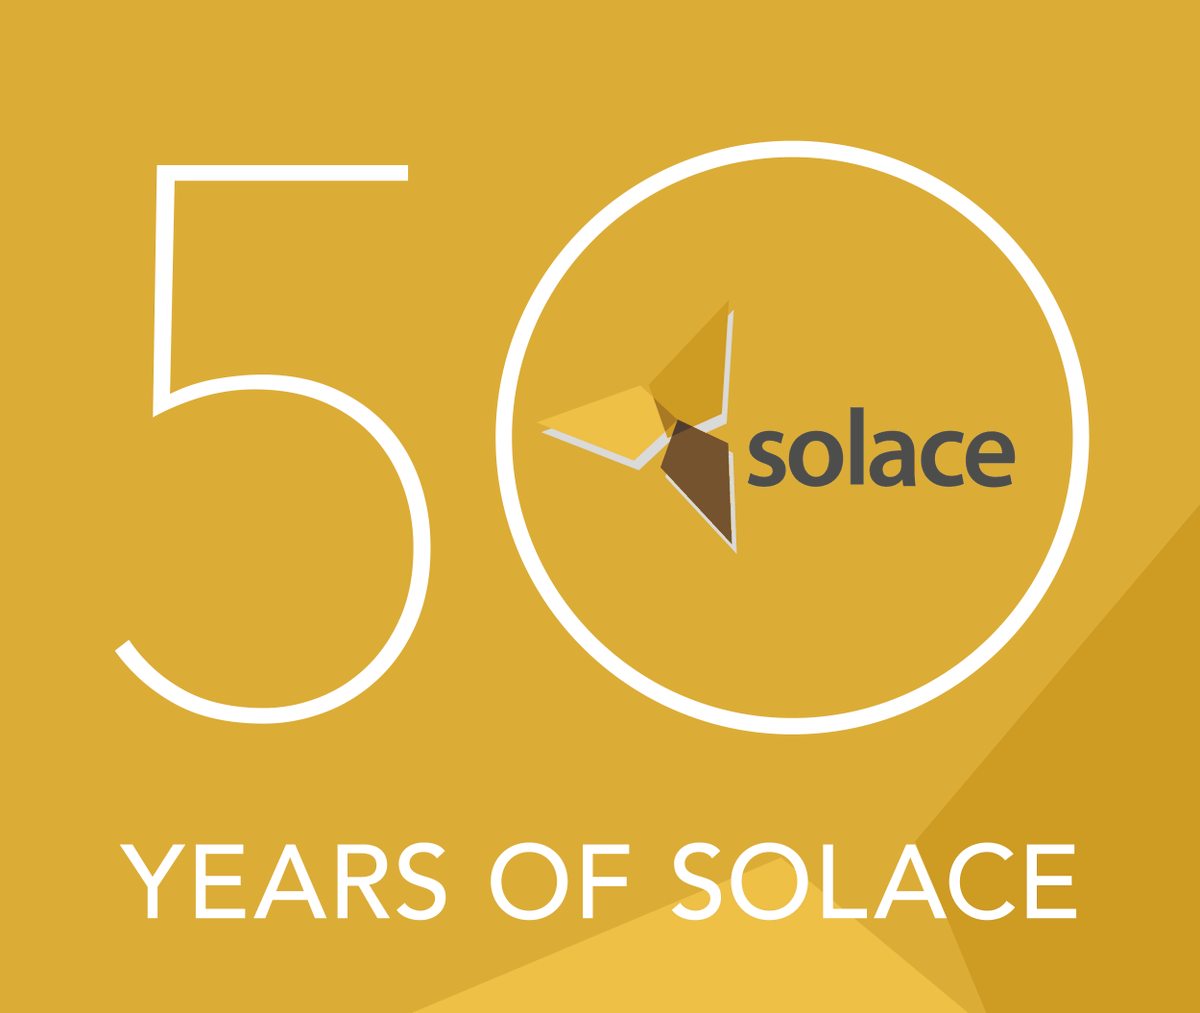 Join us to celebrate the strong women at @Solace_UK @SolaceRecruit and the #localgov sector on Women's International Day. Thank you to the first 6 women Solace presidents Pamela Gordon Cheryl Miller @TrishHainesWCC Katherine Kerswell @jomillernz @joanneroney #WID2024